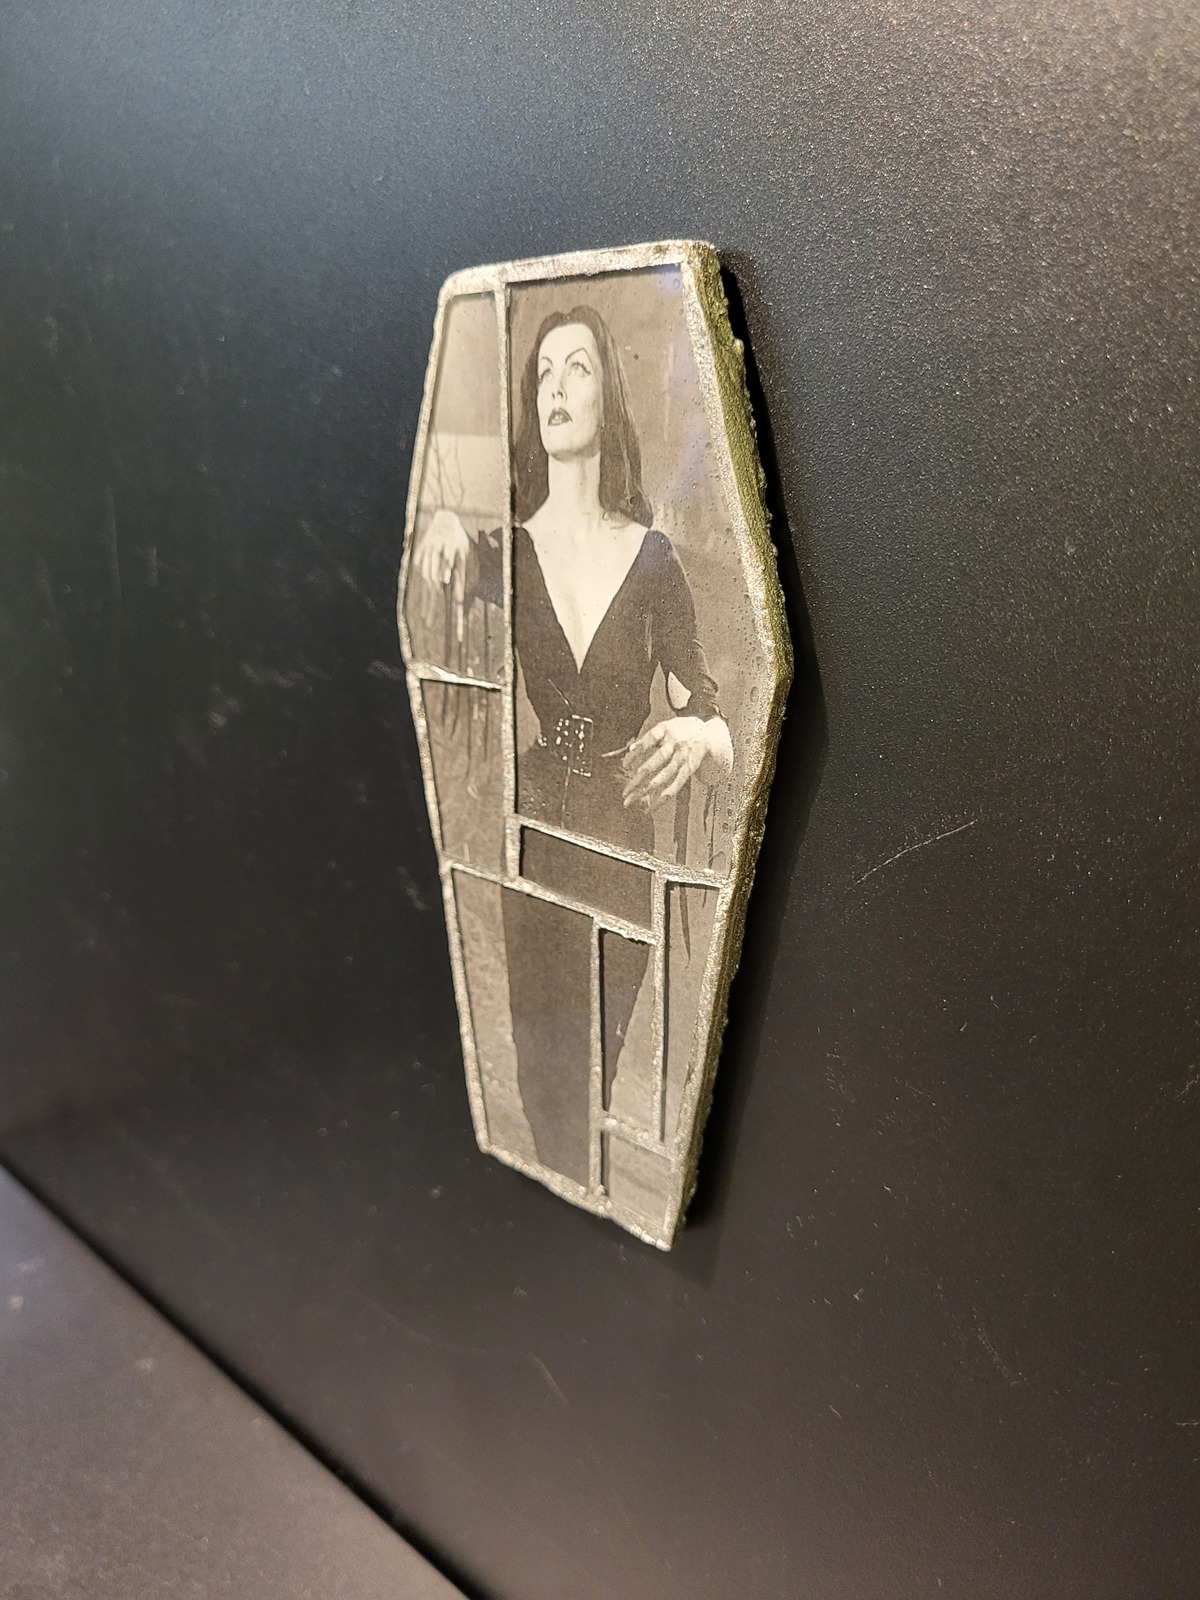 Coffin Glass mosaic magnet  "Vampira in a forest"